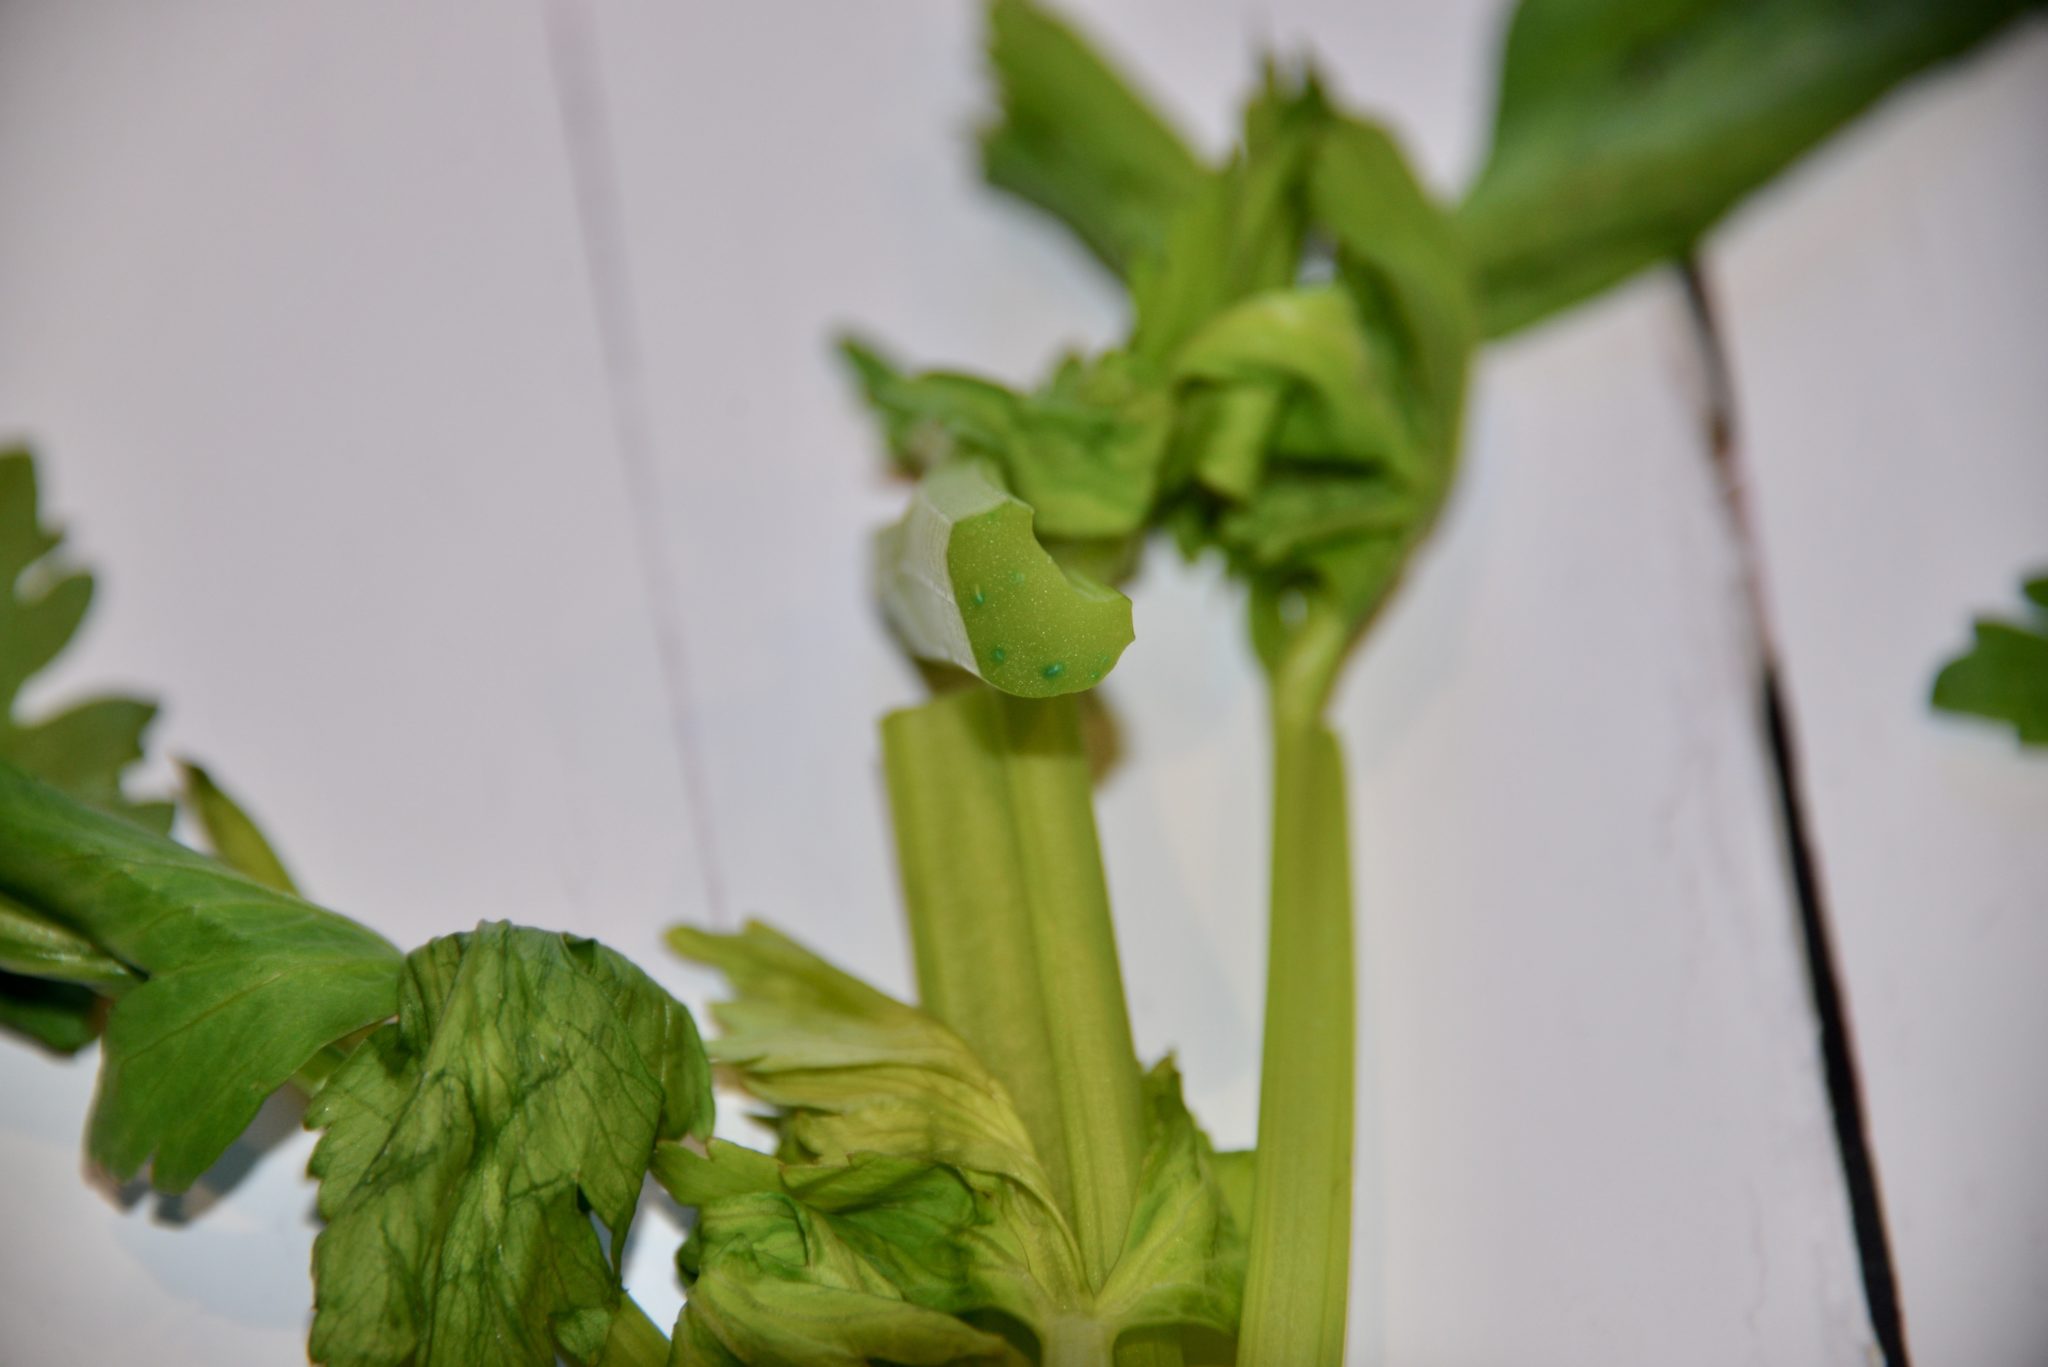 celery stalk cut in half to show how far water coloured with food colouring has reached up the stalk.